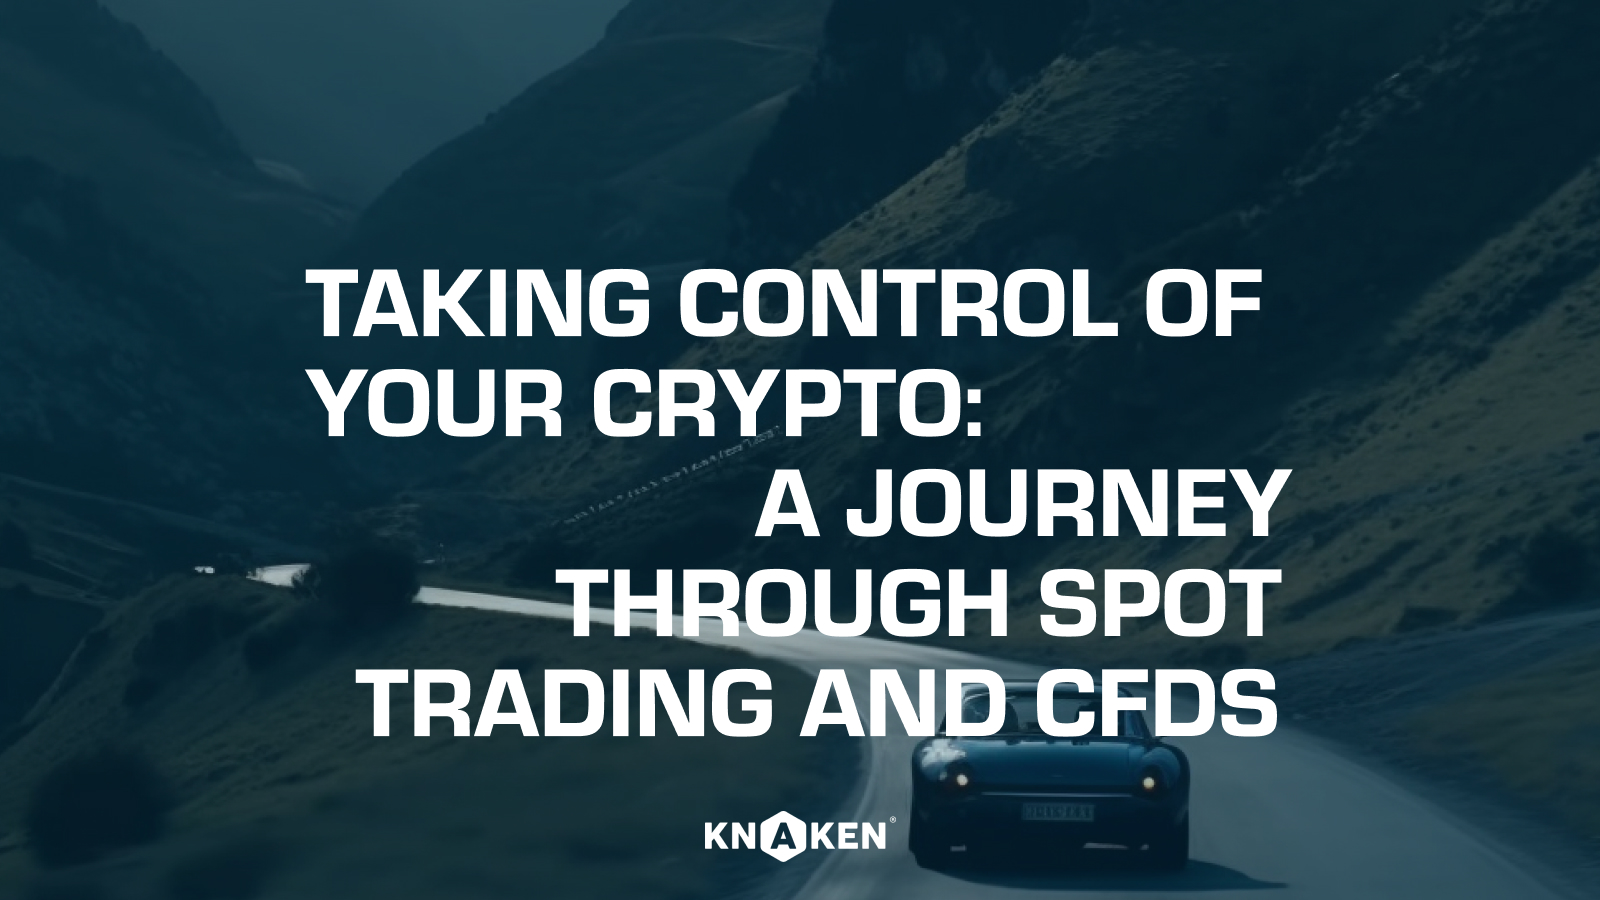 Taking Control of Your Crypto: A Journey Through Spot Trading and CFDs